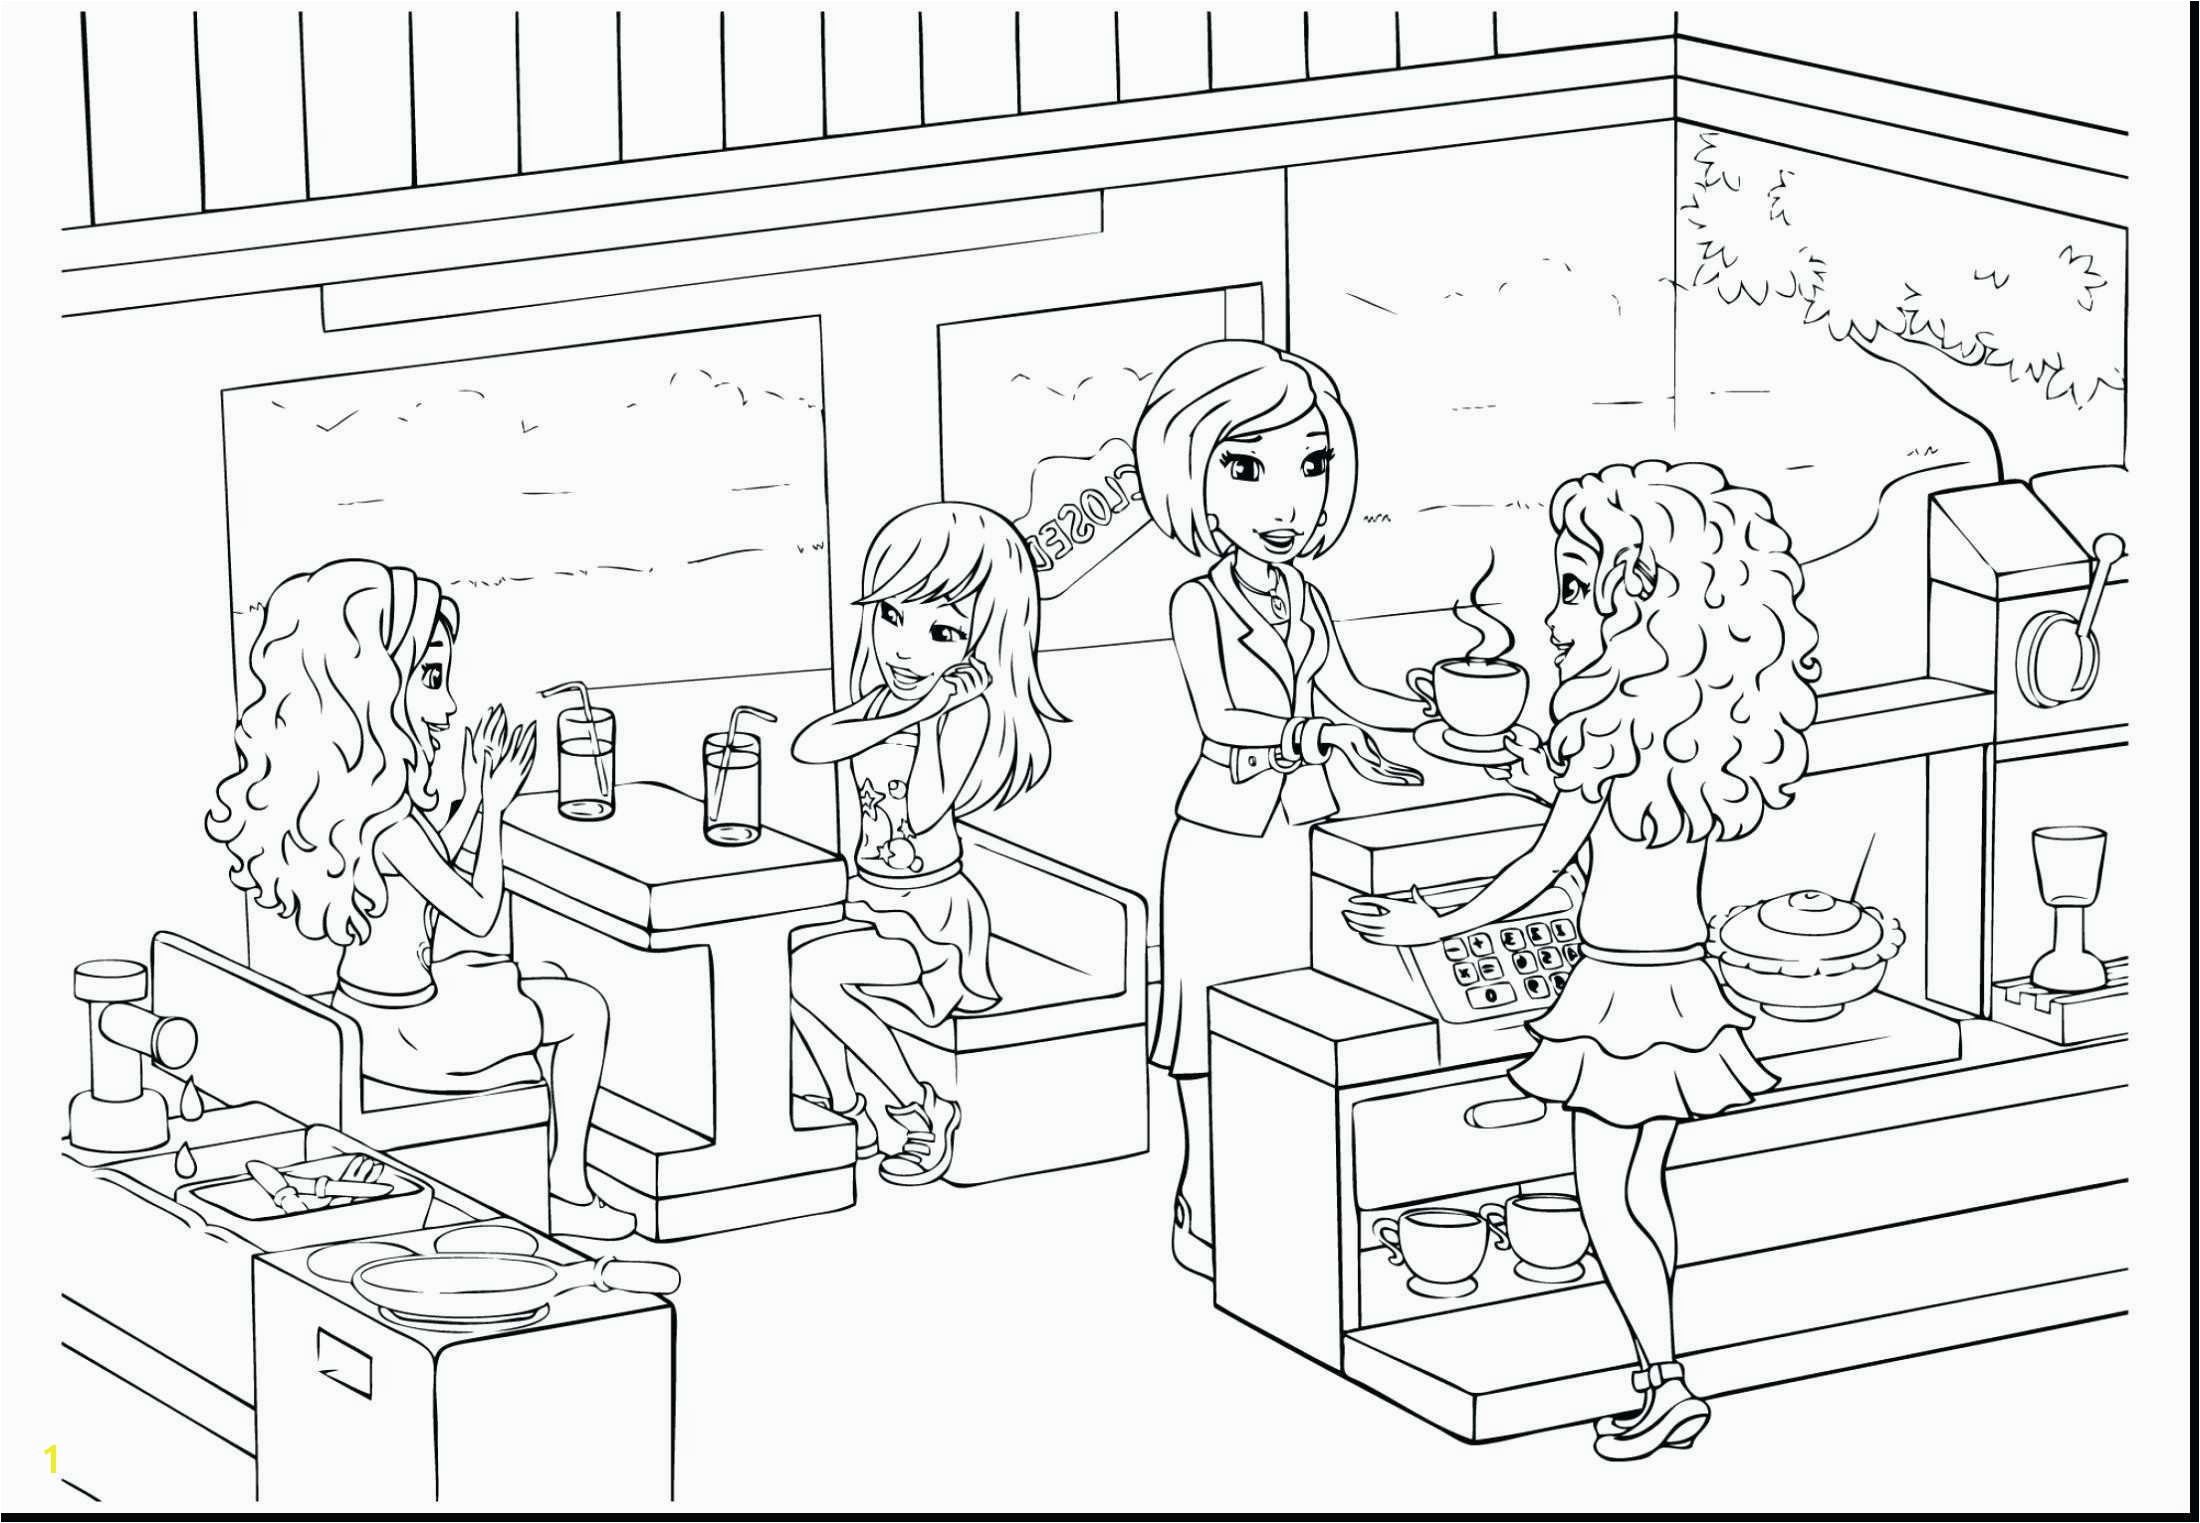 Printable Lego Friends Coloring Pages Lego and Friends Coloring Pages New Coloring Pages for Girls Lego